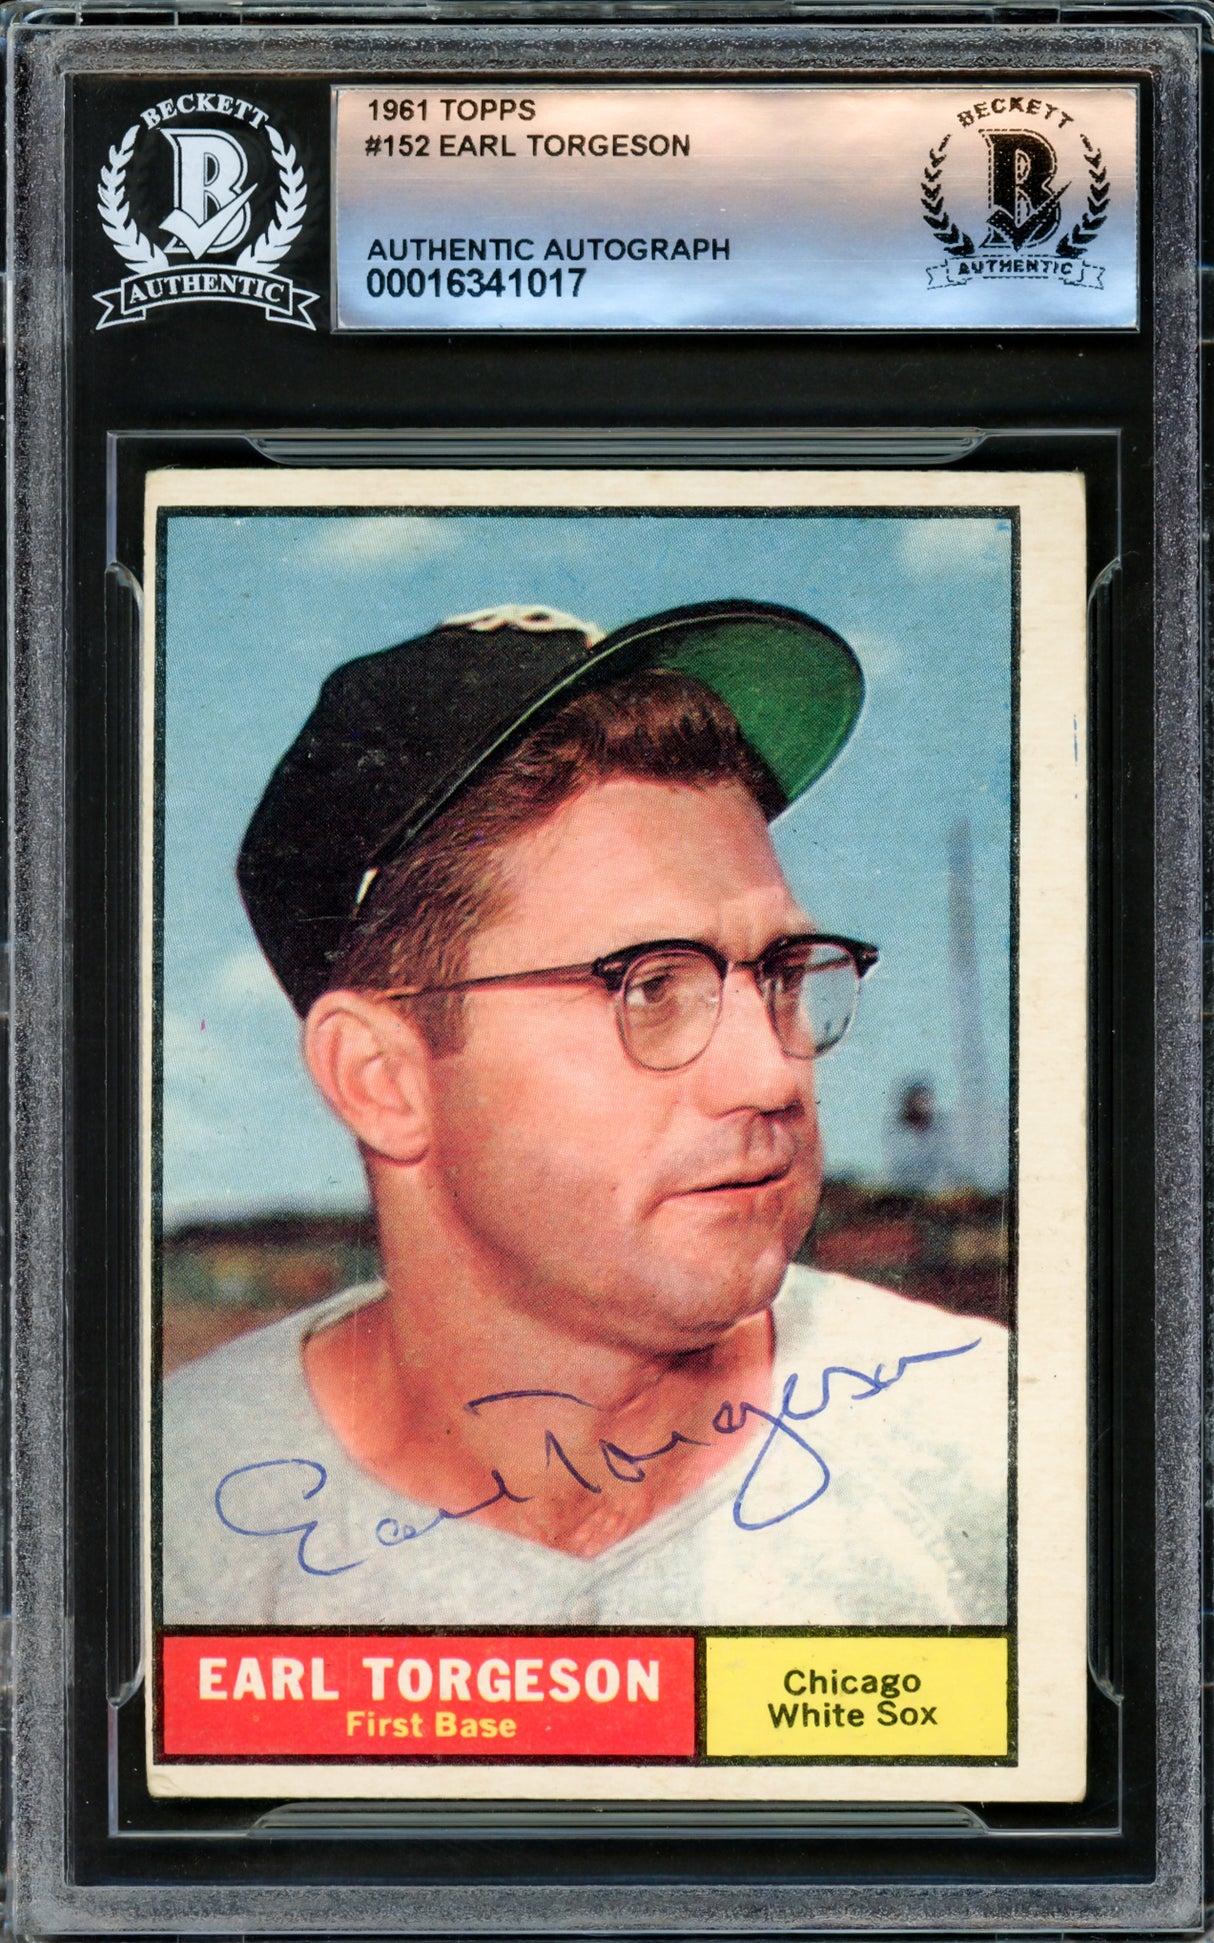 Earl Torgeson Autographed 1961 Topps Card #152 Chicago White Sox Beckett BAS #16341017